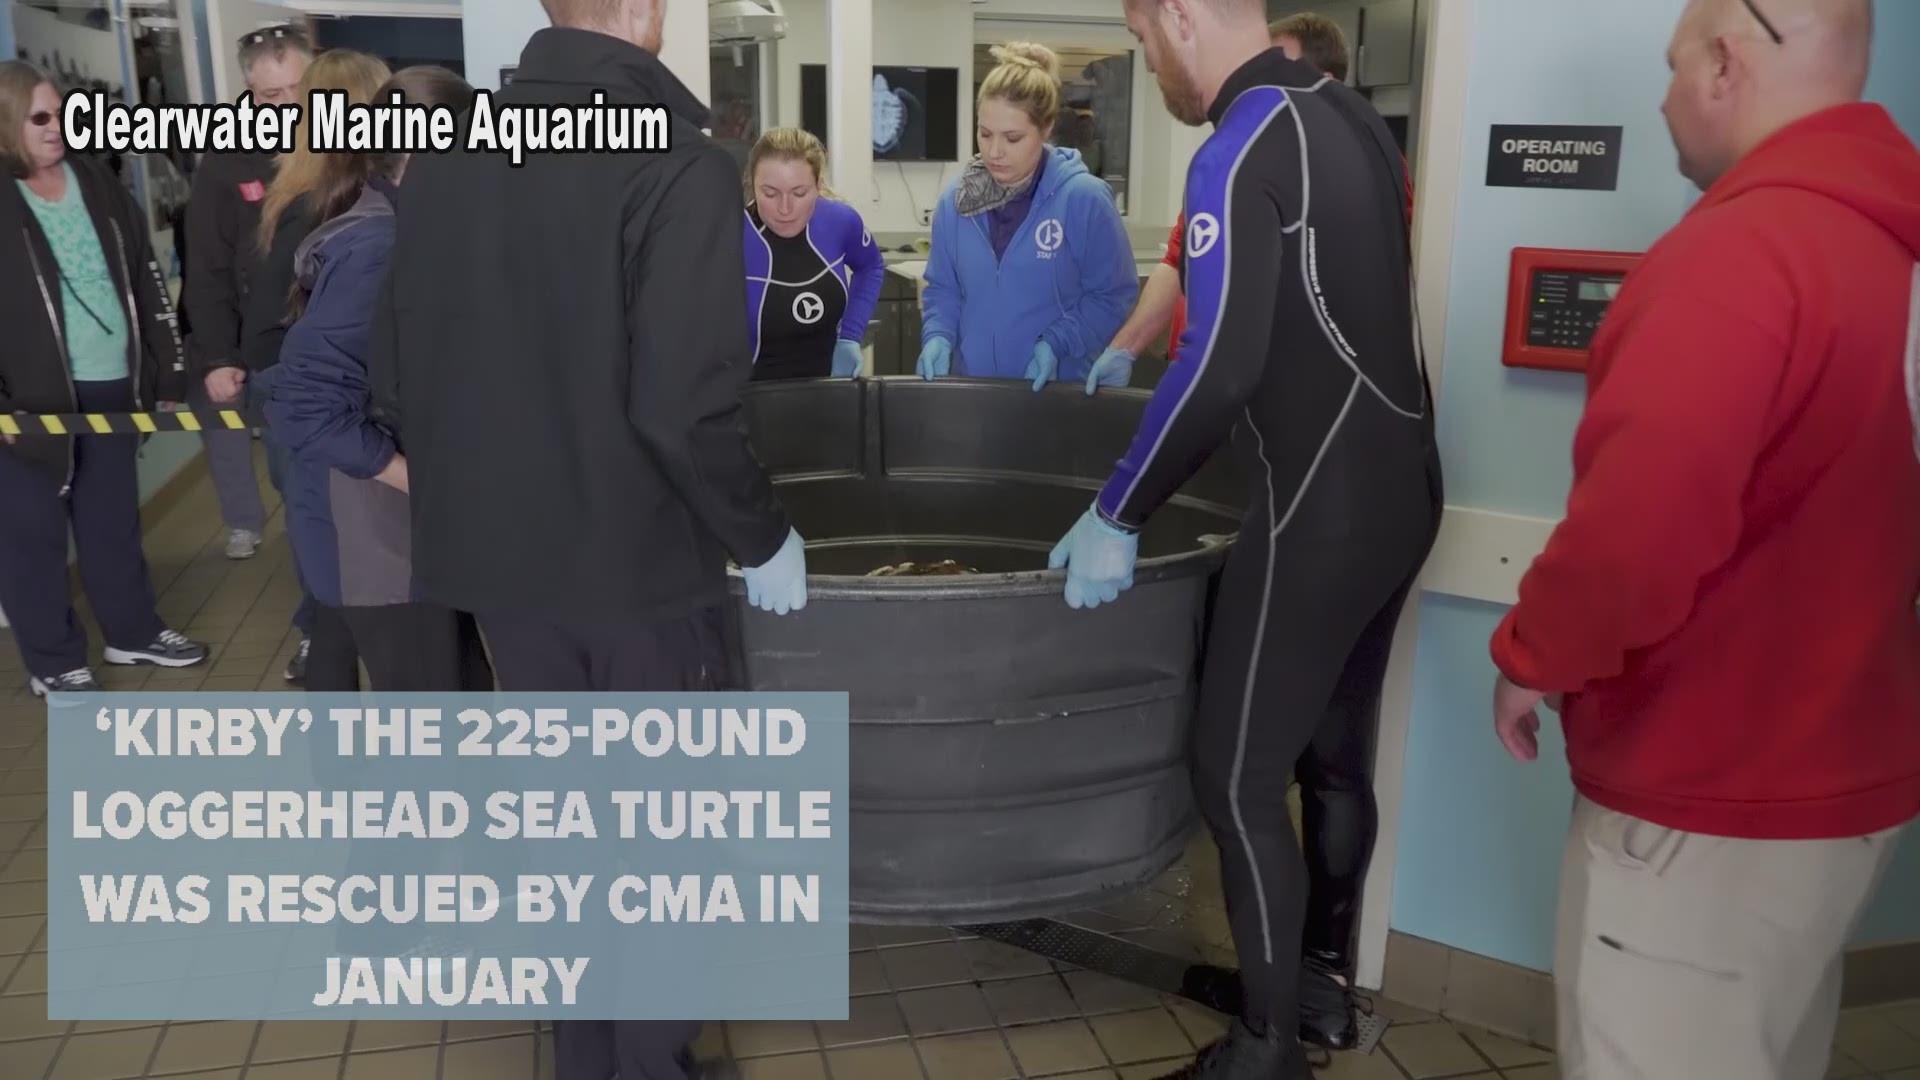 The 225-pound endangered loggerhead sea turtle was affectionately named Kirby by aquarium staff.